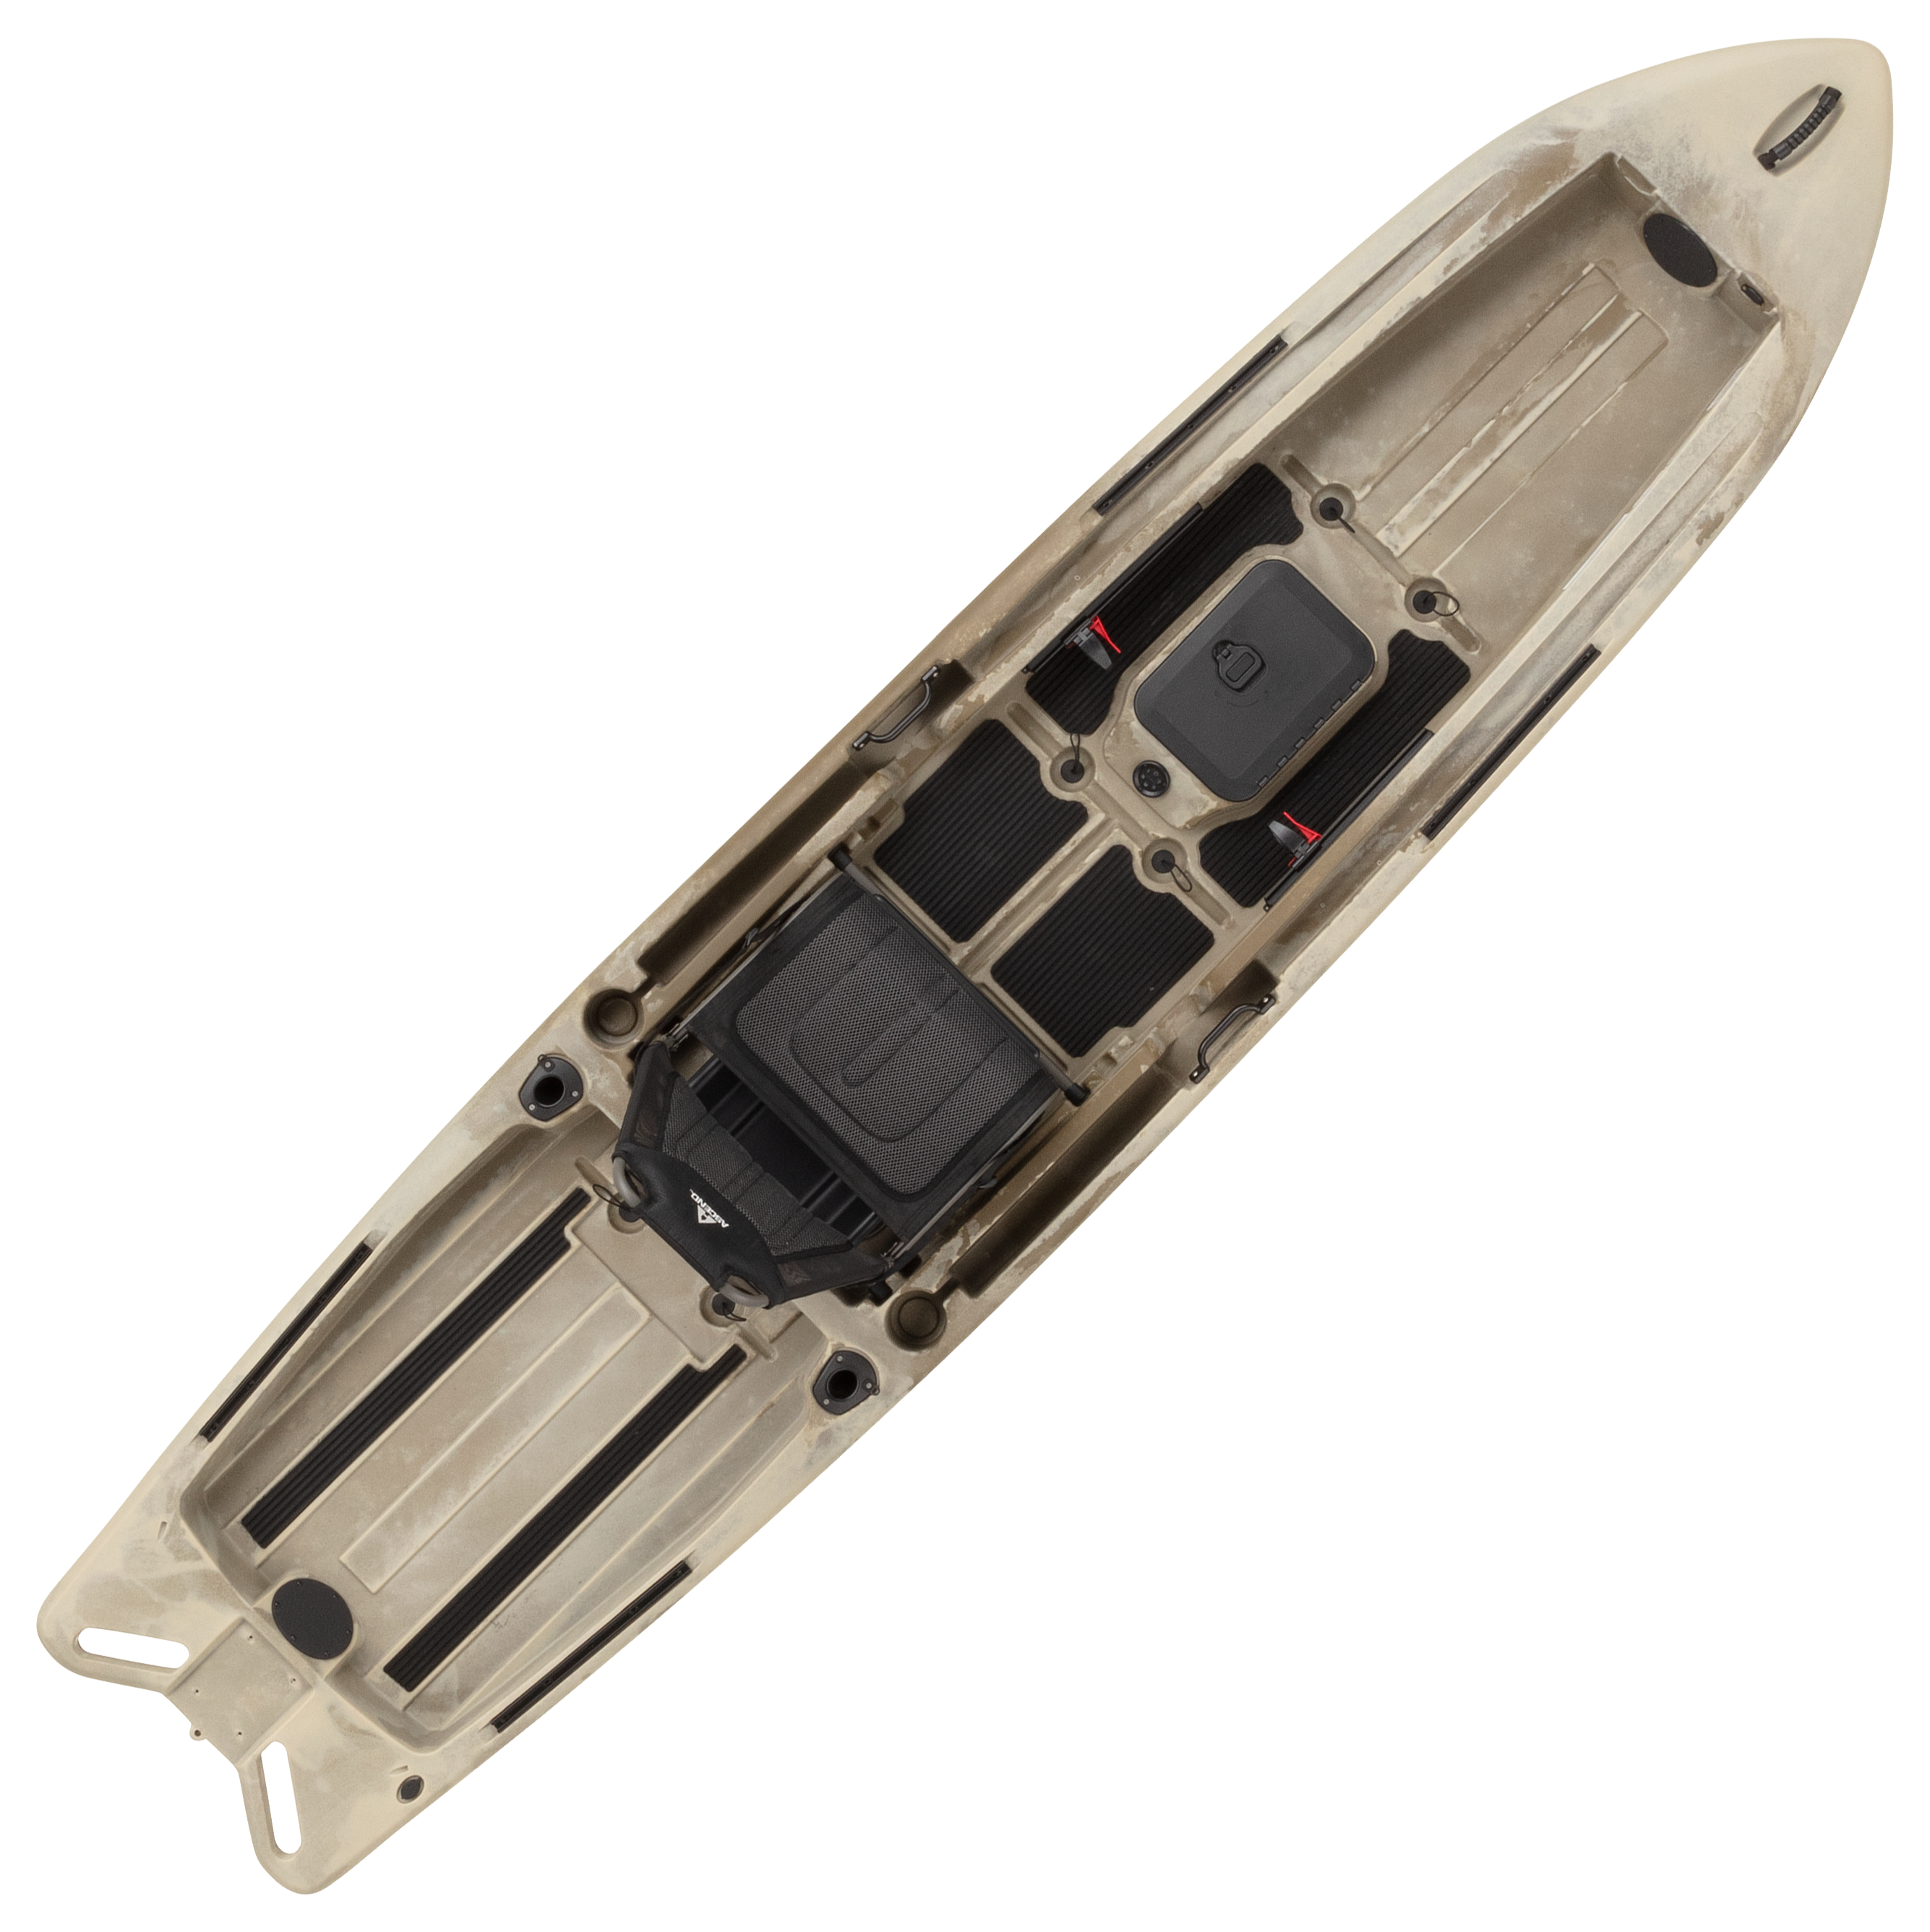 Ascend 128X Sit-on-Top Kayak with Yak-Power - Desert Storm